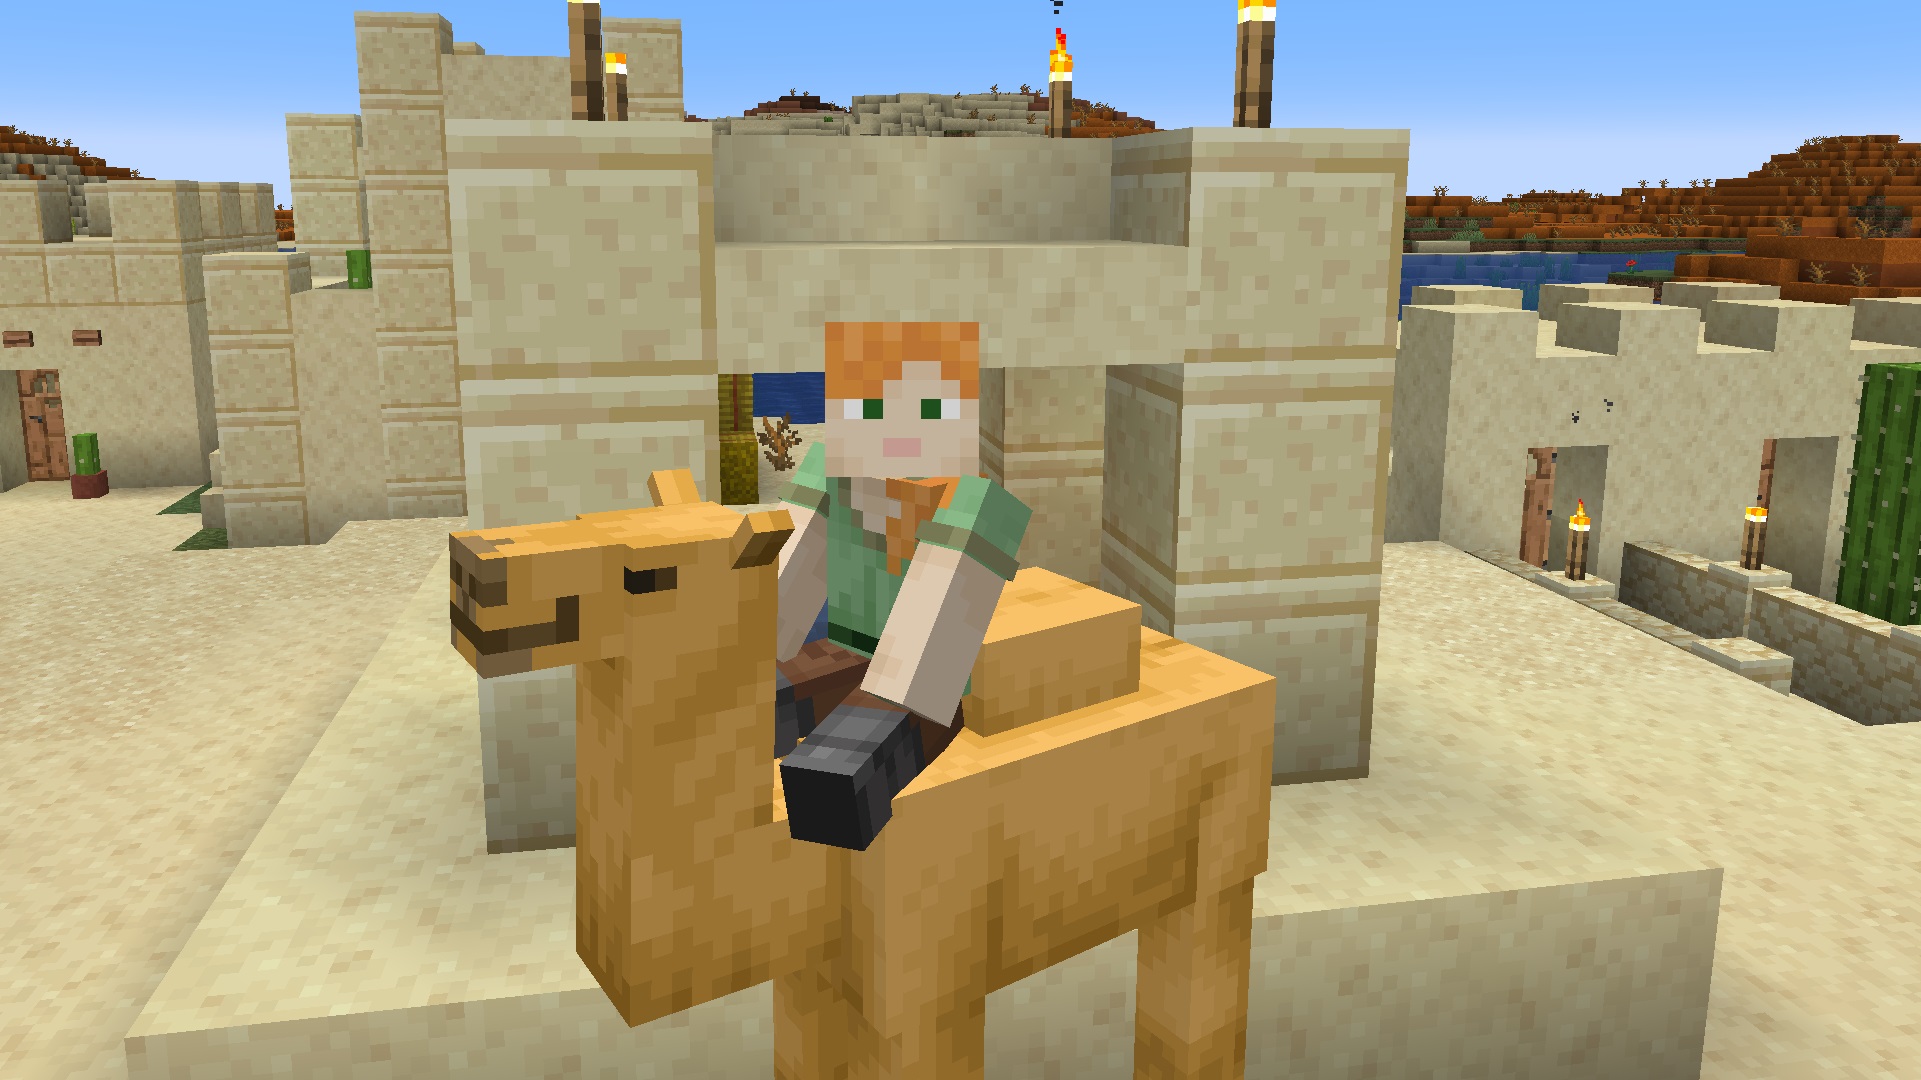 Minecraft's Latest Update Is Now Live, Here Are The Full Patch Notes